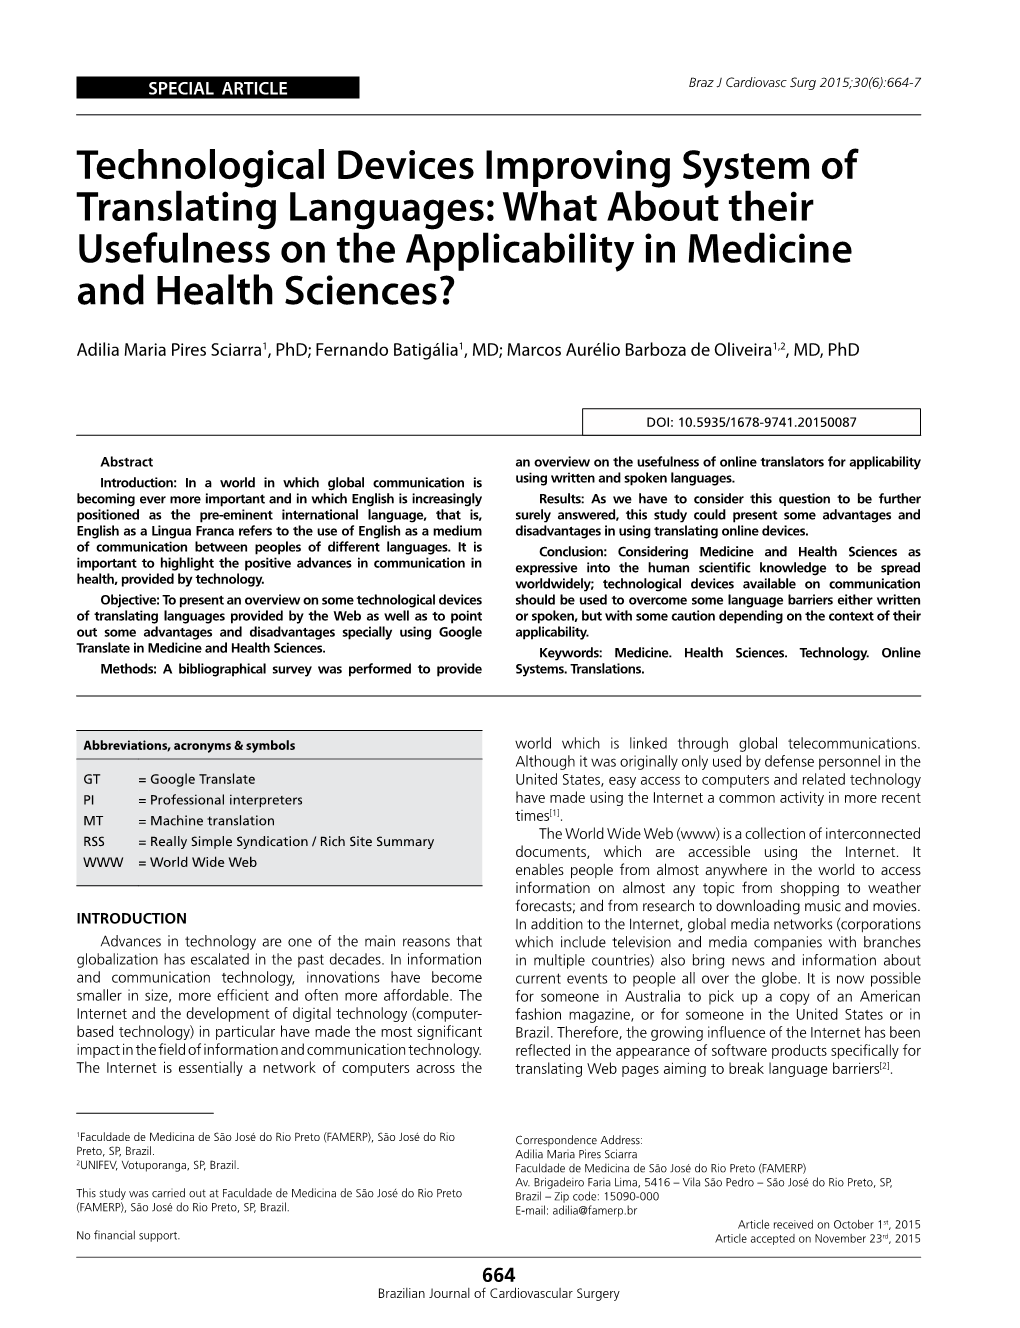 Technological Devices Improving System of Translating Languages: What About Their Usefulness on the Applicability in Medicine and Health Sciences?